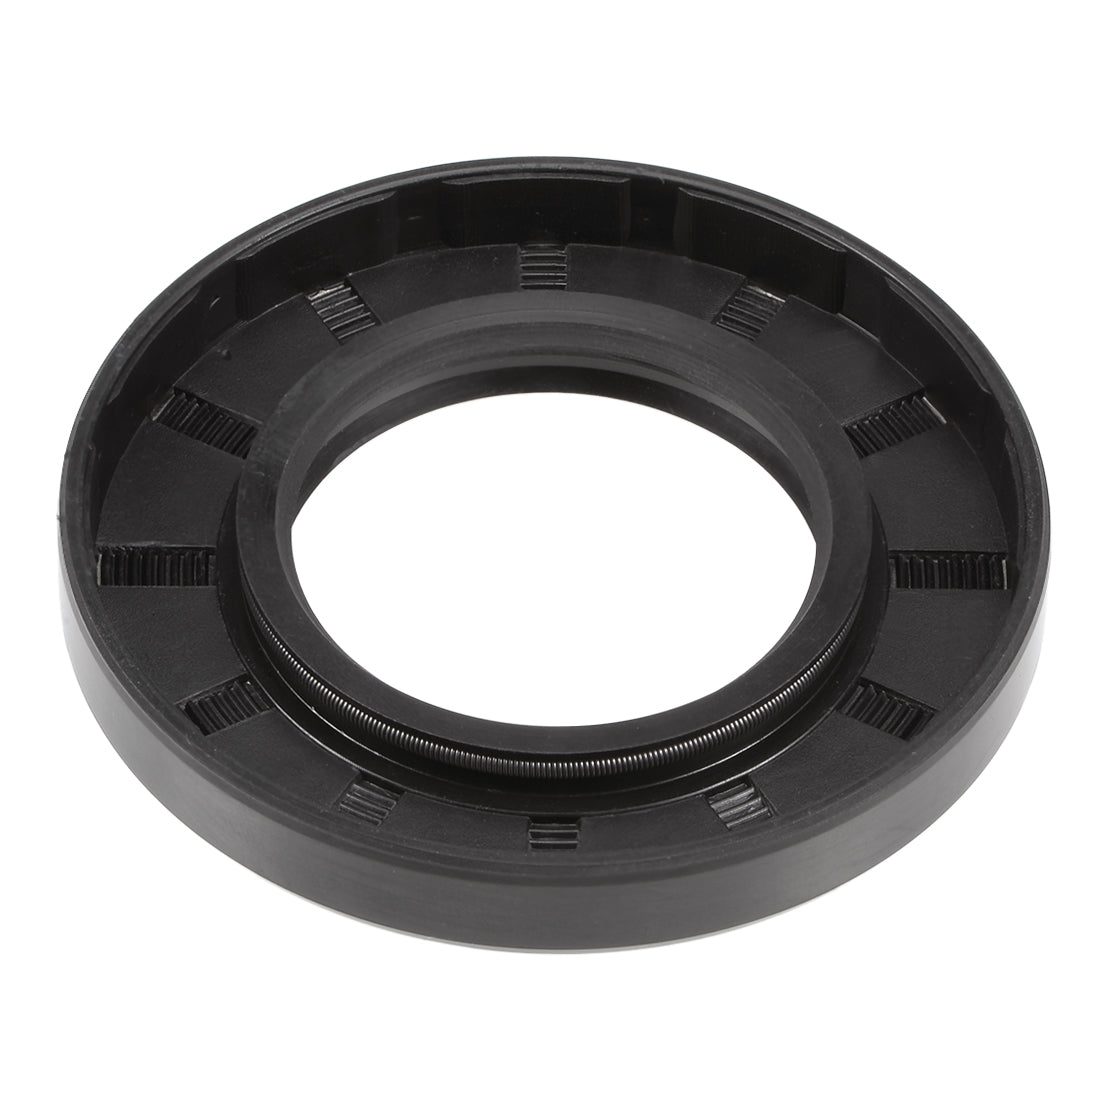 uxcell Uxcell Oil Seal, TC 40mm x 72mm x 10mm, Nitrile Rubber Cover Double Lip